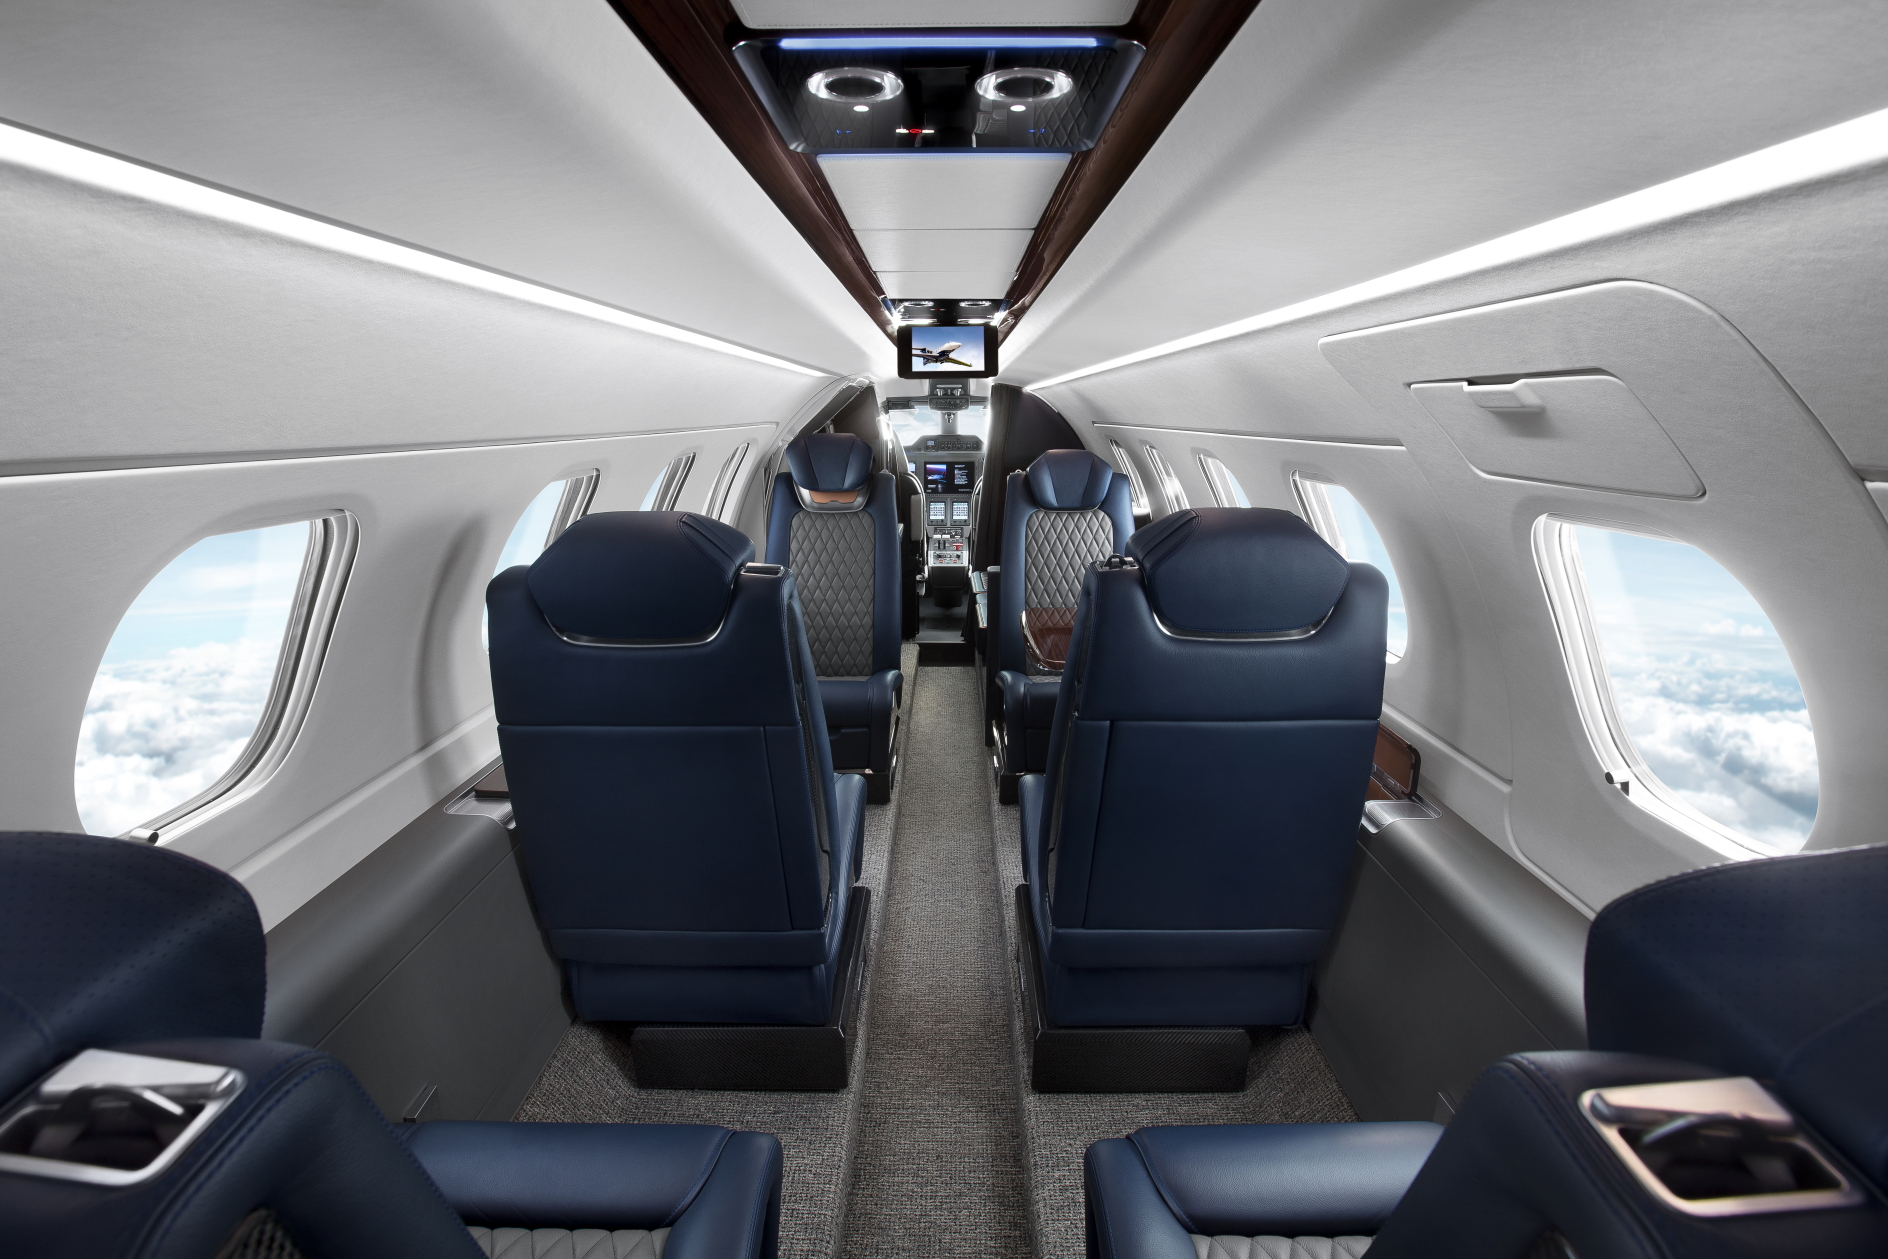 Inside an Embraer Phenom 300E. Click to enlarge.